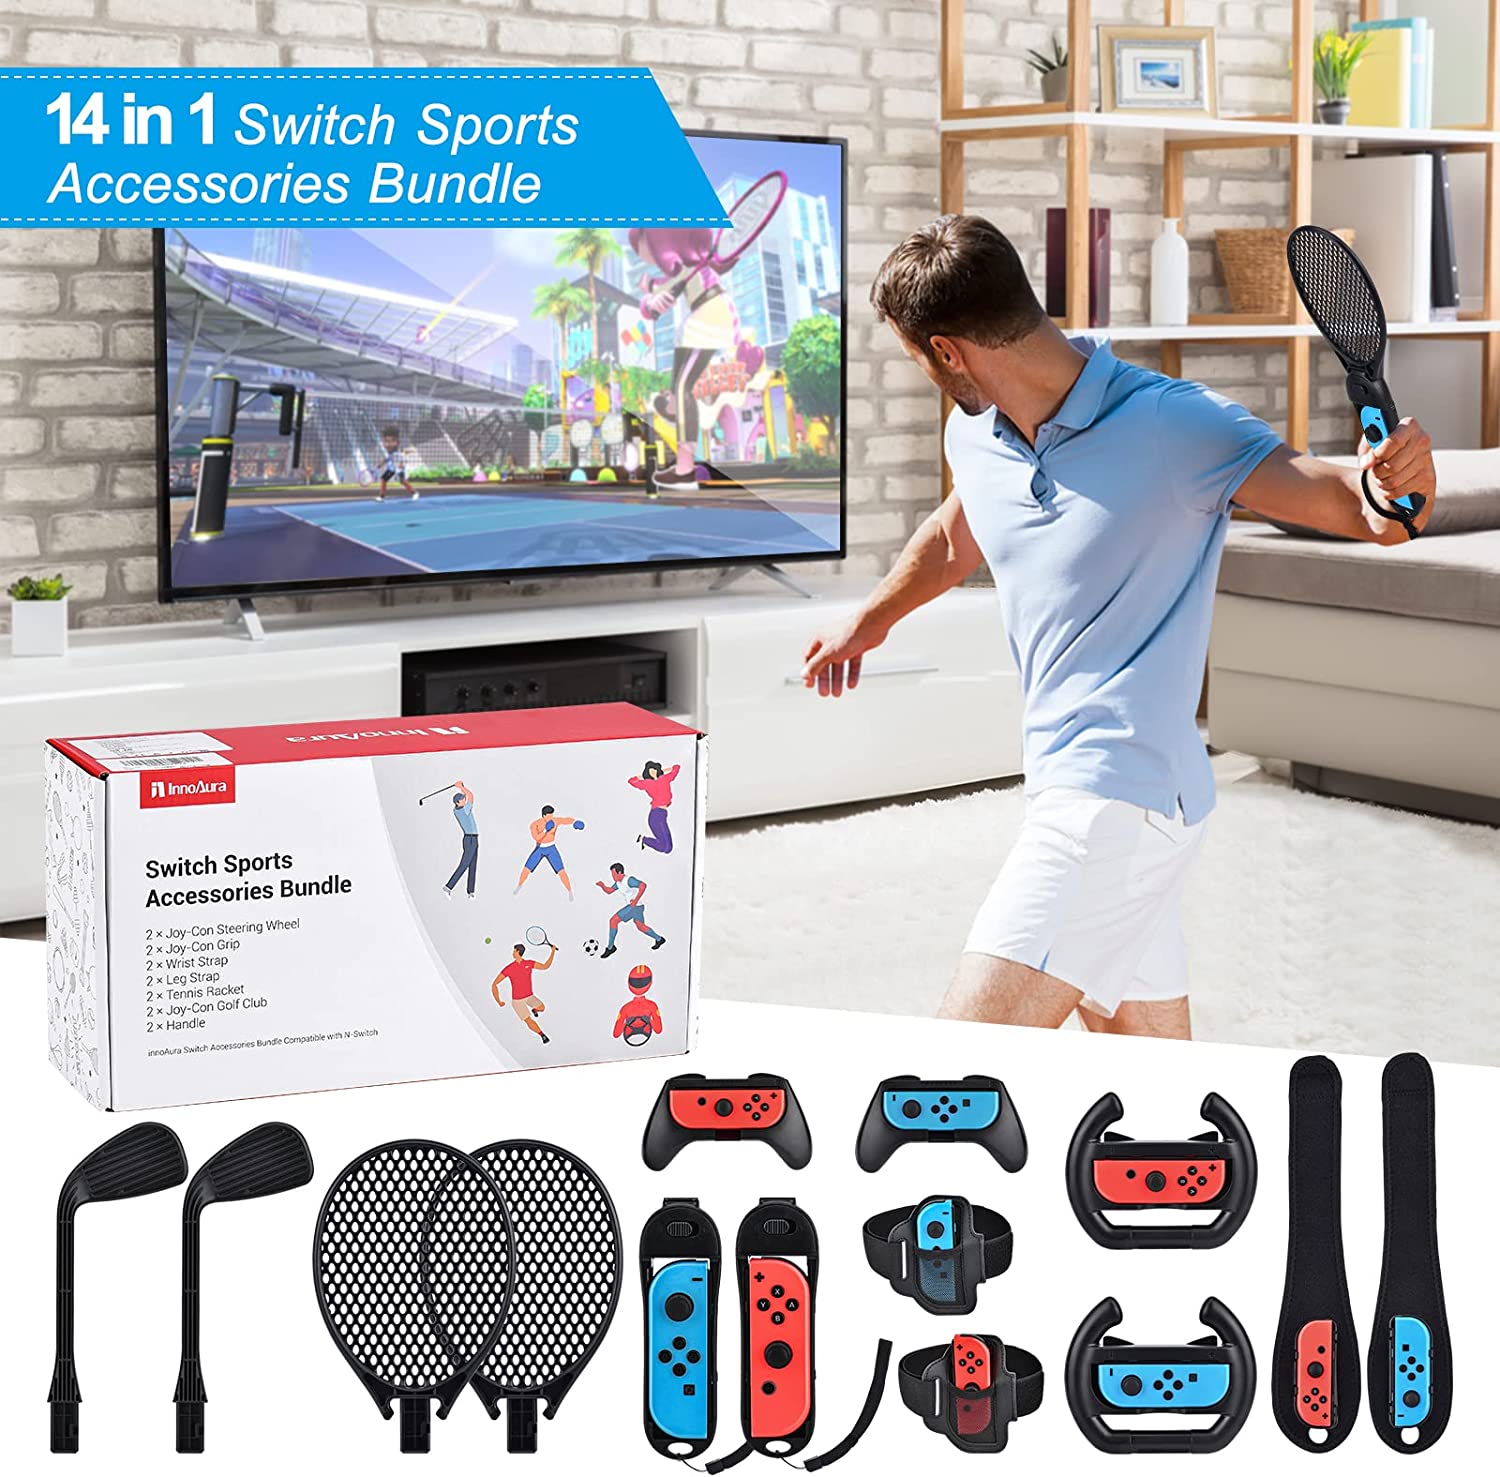 innoAura Bundle for Switch/Switch OLED Sports with 14 Accessories